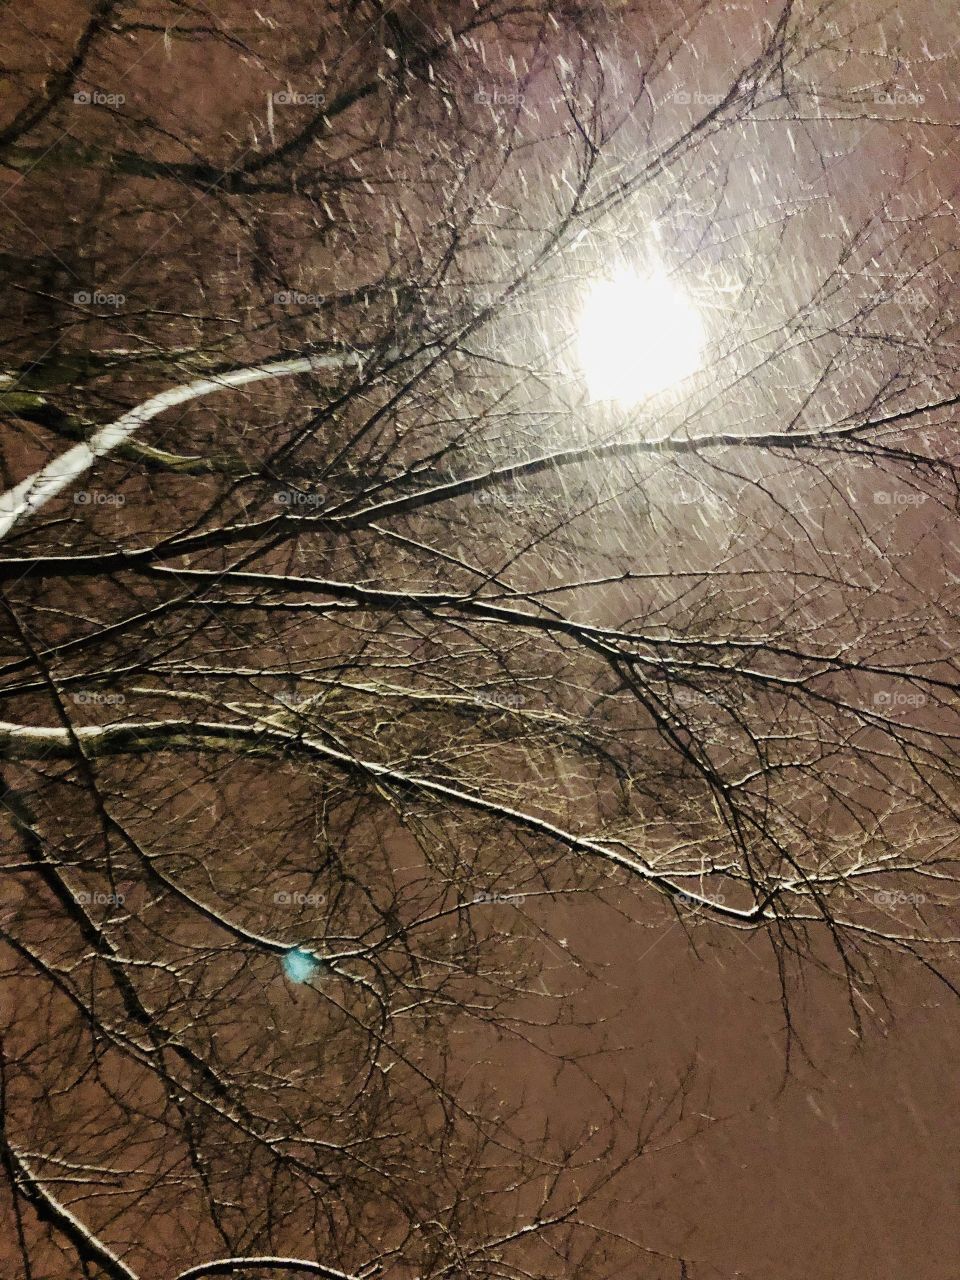 Snow Storm Night 03-January 08 2019-Montreal, Quebec, Canada 